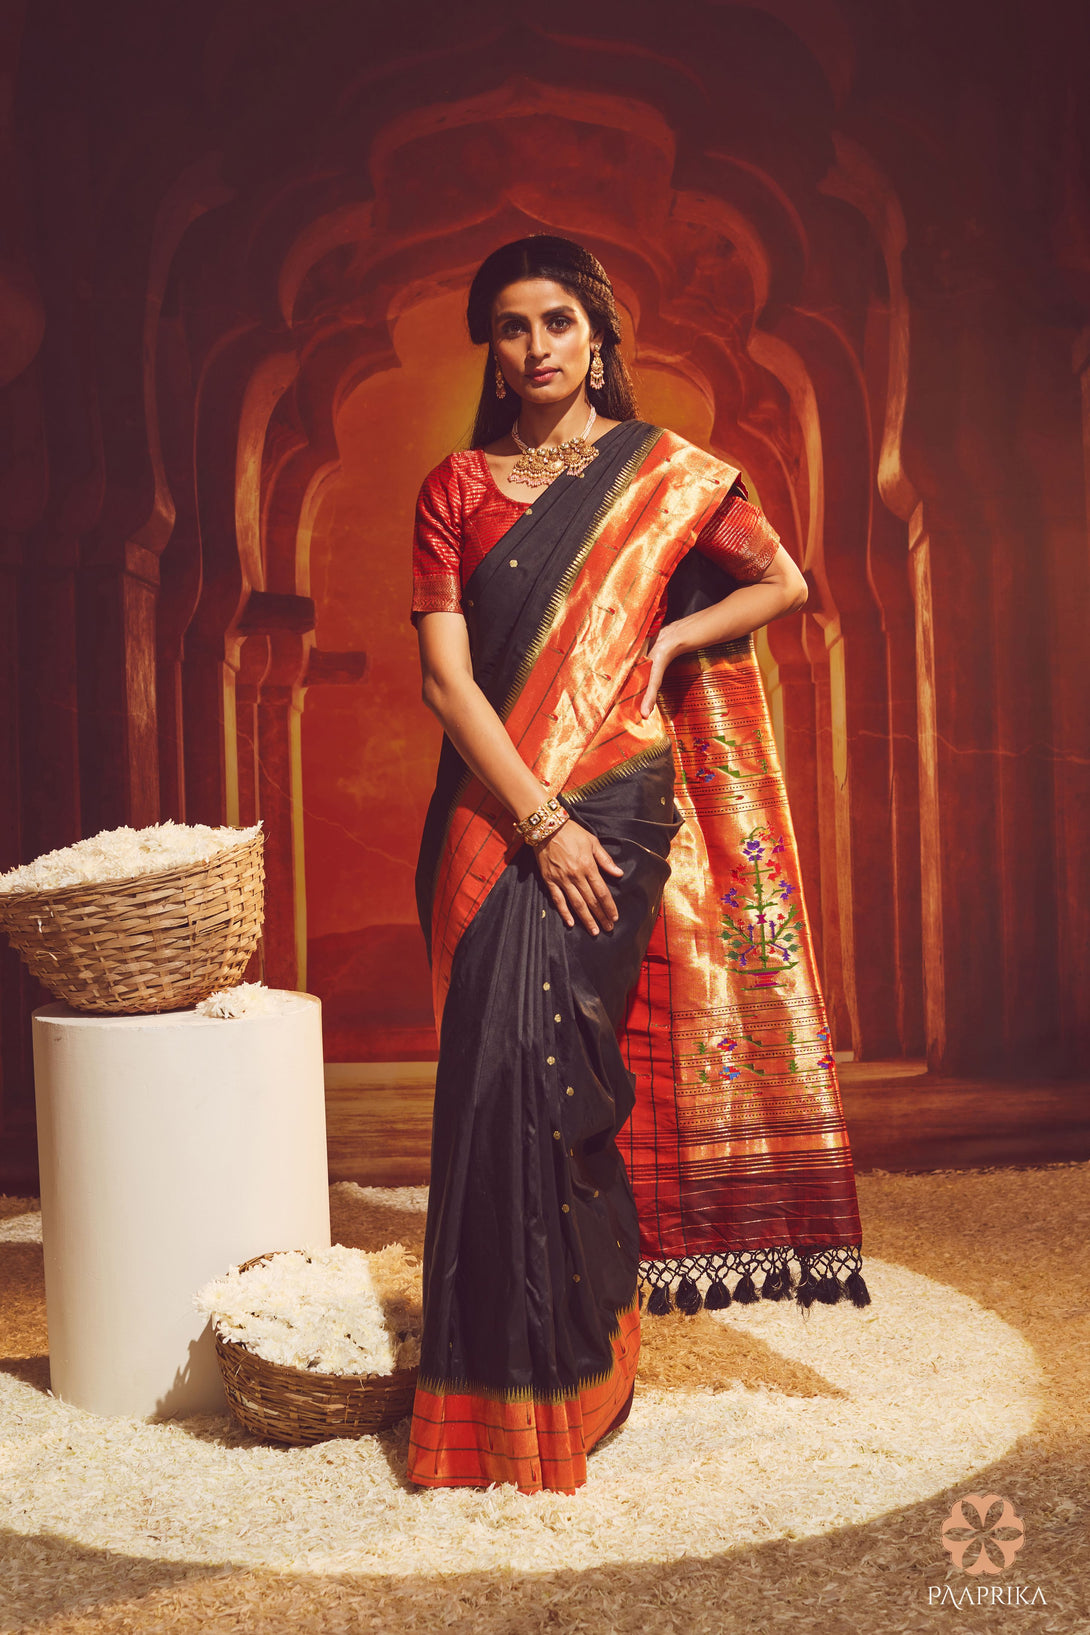 Stunning Black Triple Muniya Handwoven Paithani Silk Saree showcasing intricate Indian heritage. The saree features a rich black base with exquisite handwoven Muniya motifs in vibrant colors, representing the epitome of Indian cultural artistry and craftsmanship.